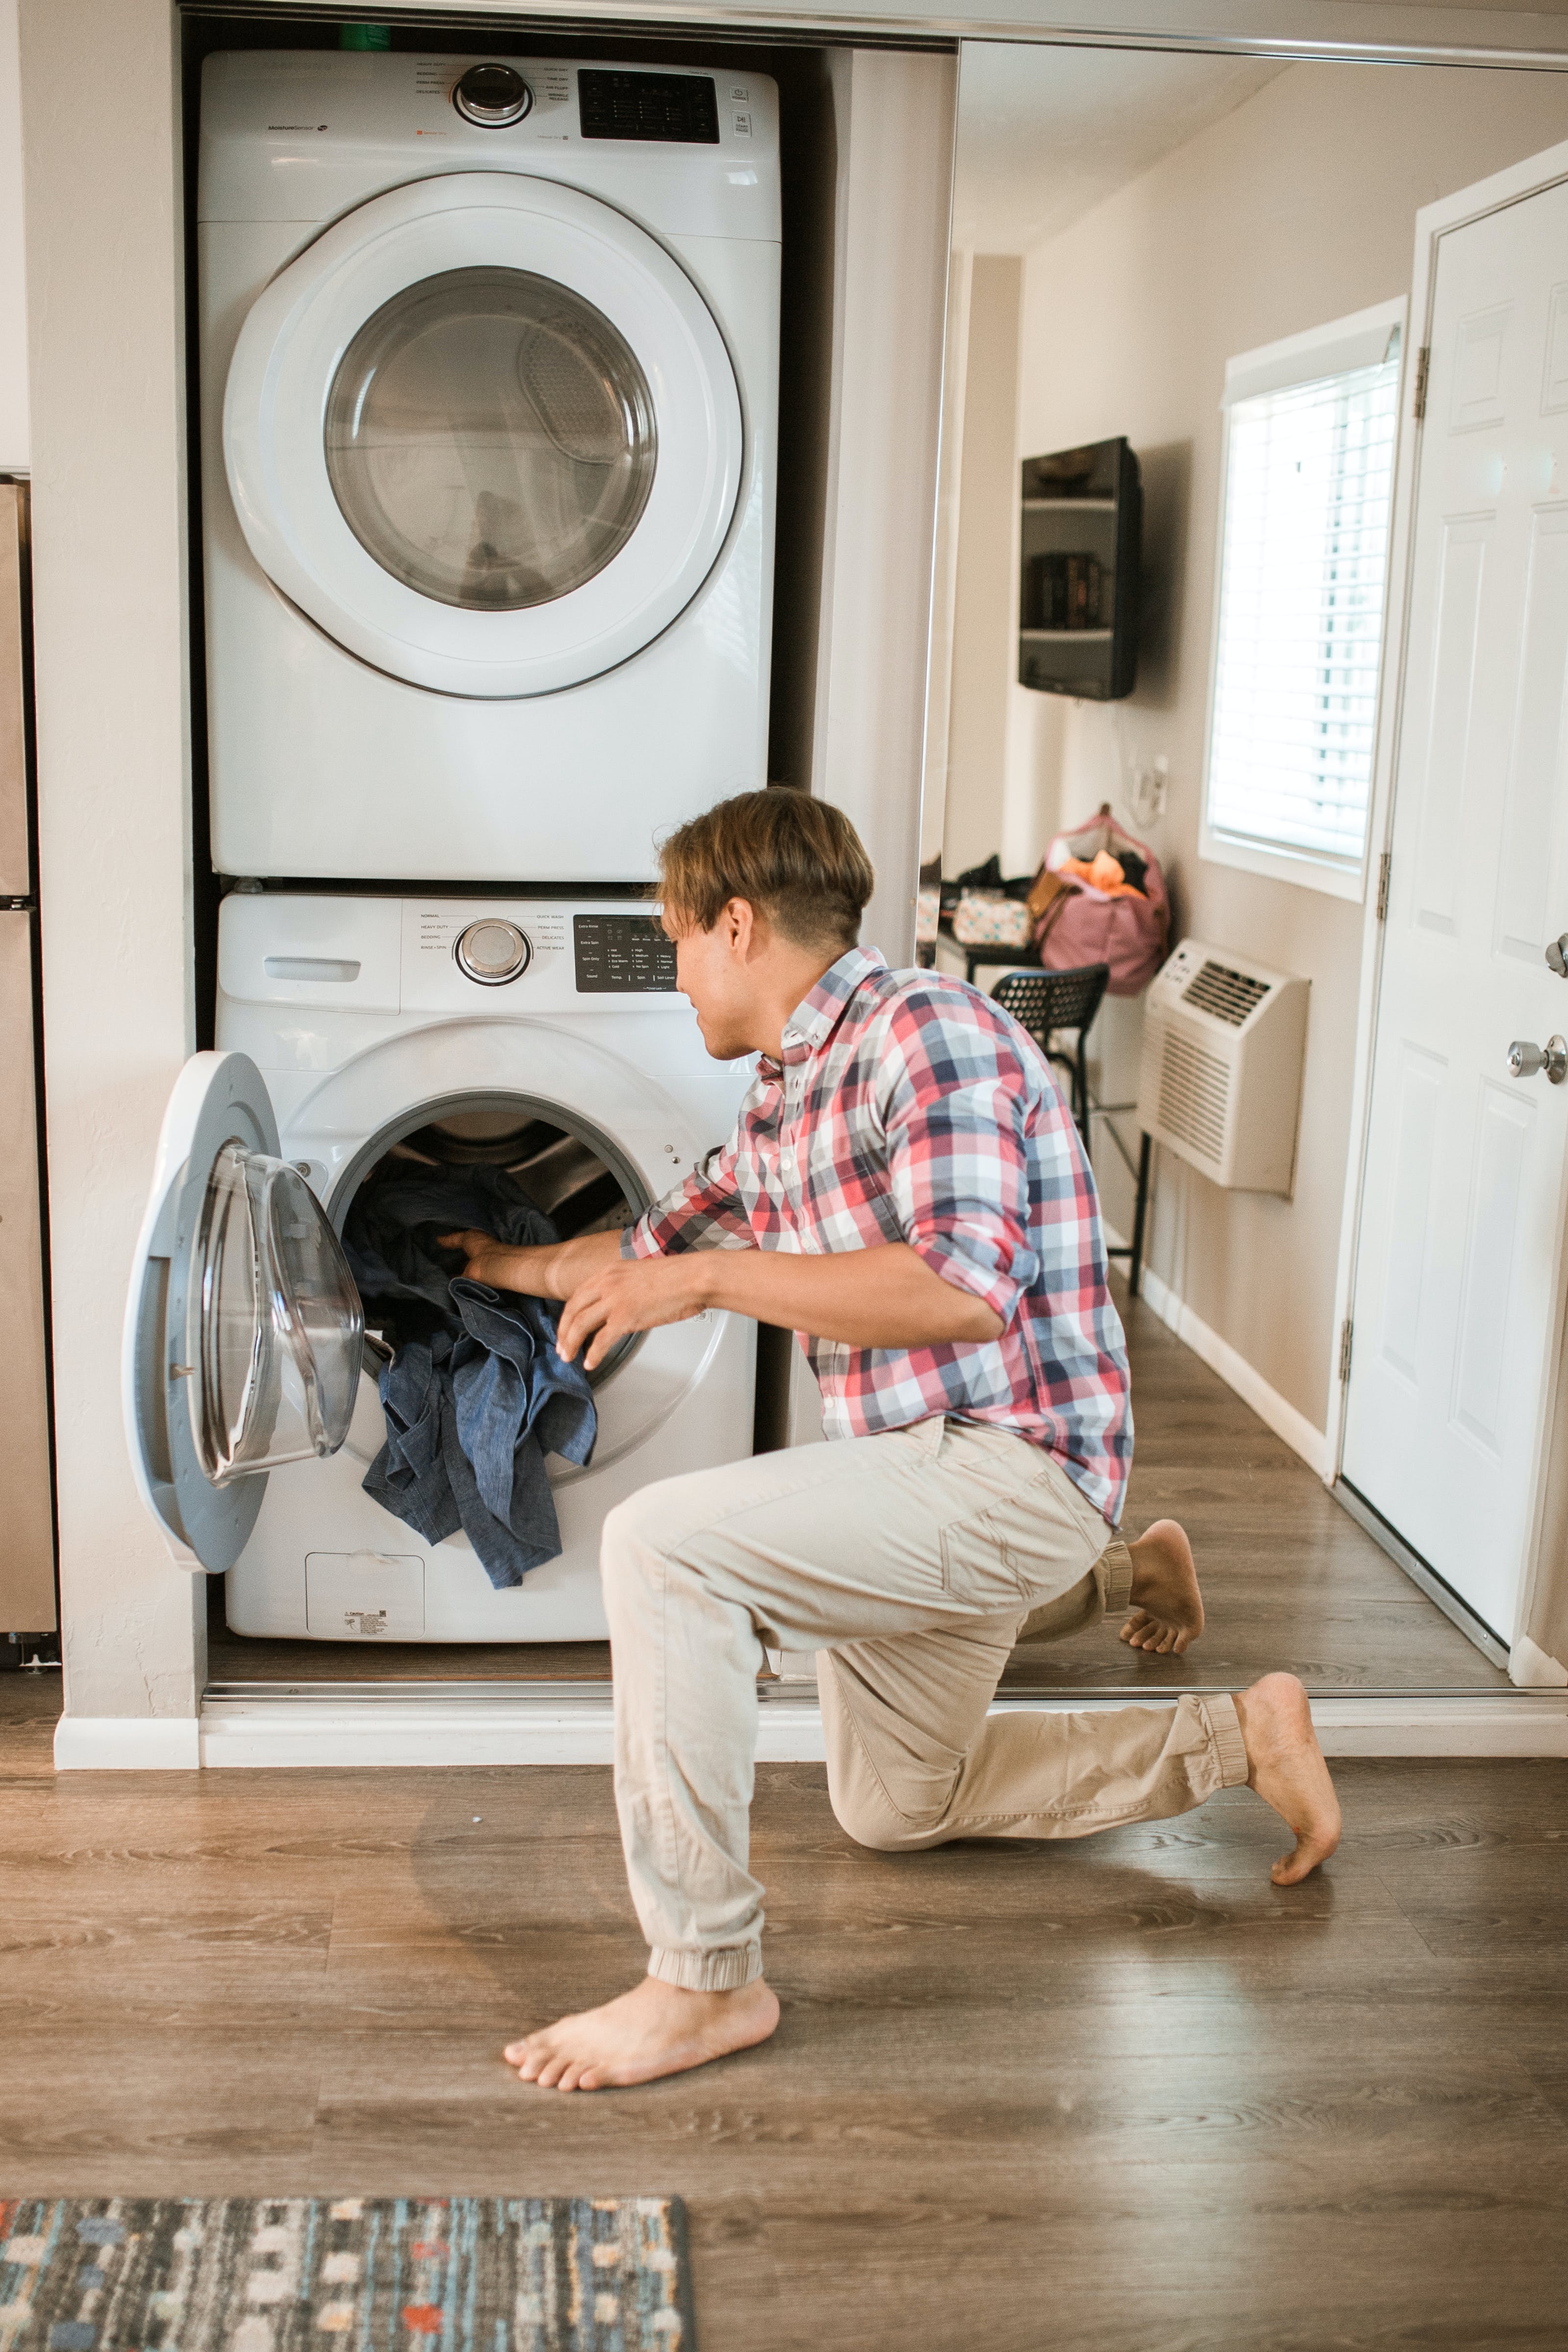 Wash painted jeans with fabric softener.  |  Source: Shutter Stock